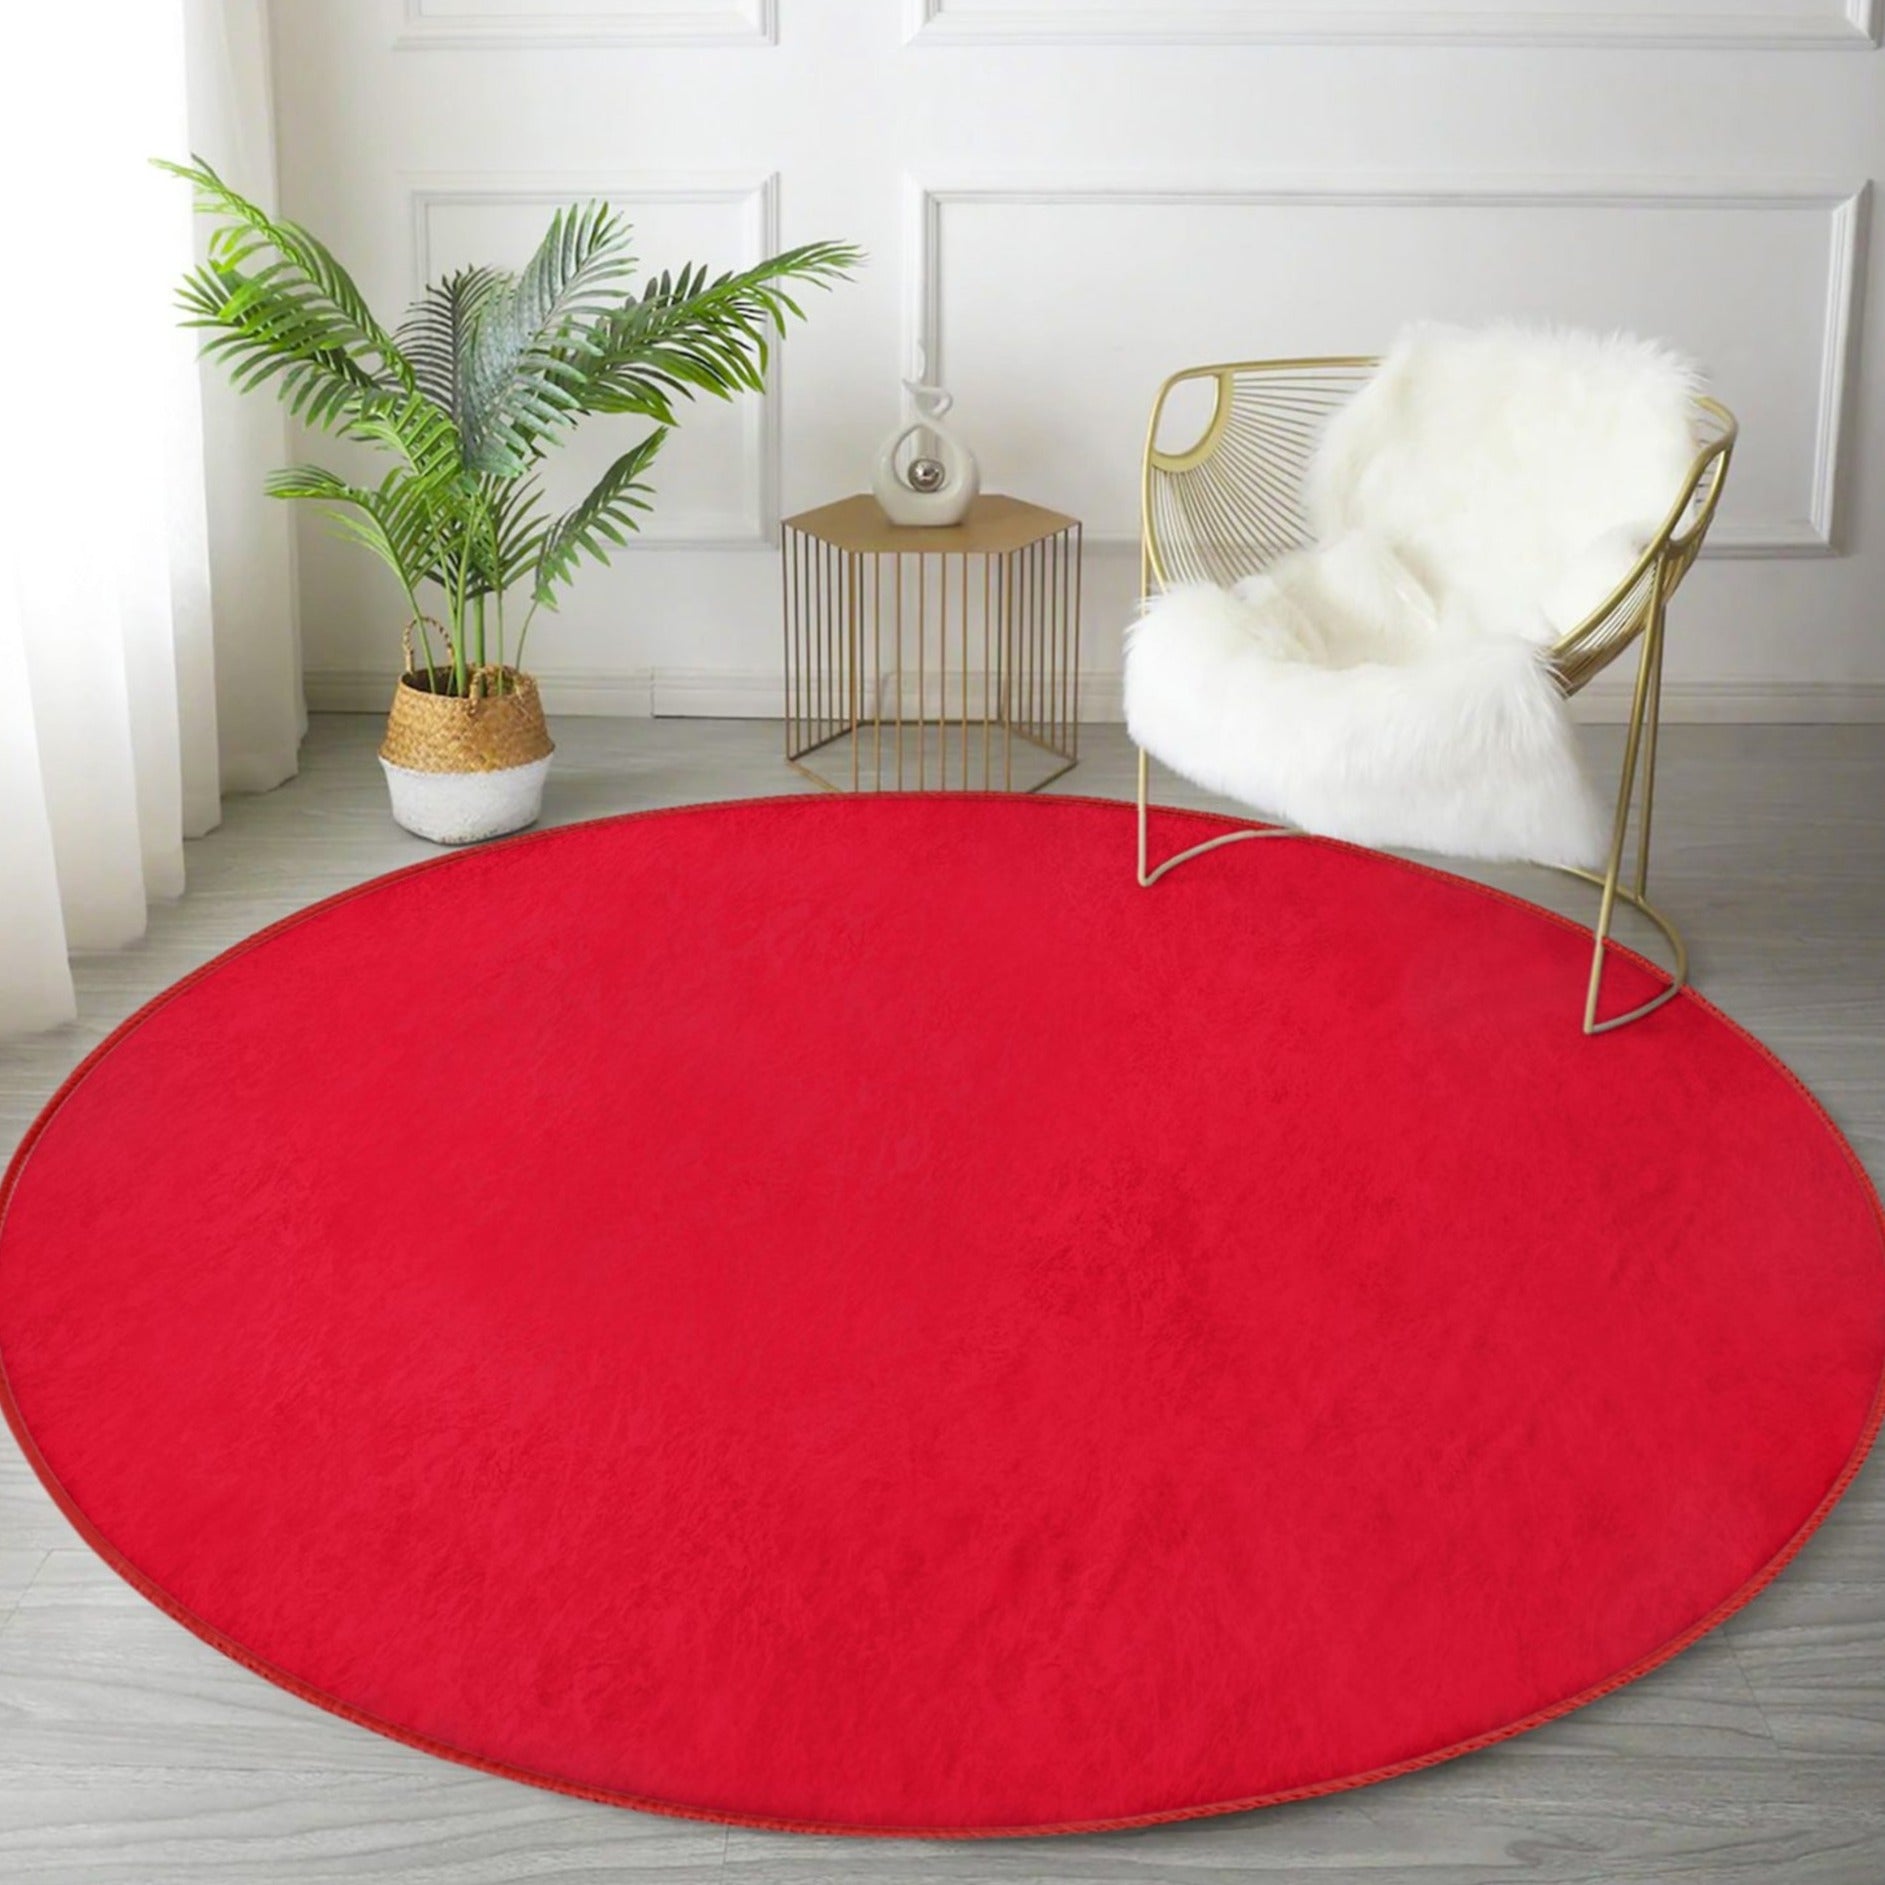 Trendy Red Colour Home Decor Round Rug by Homeezone